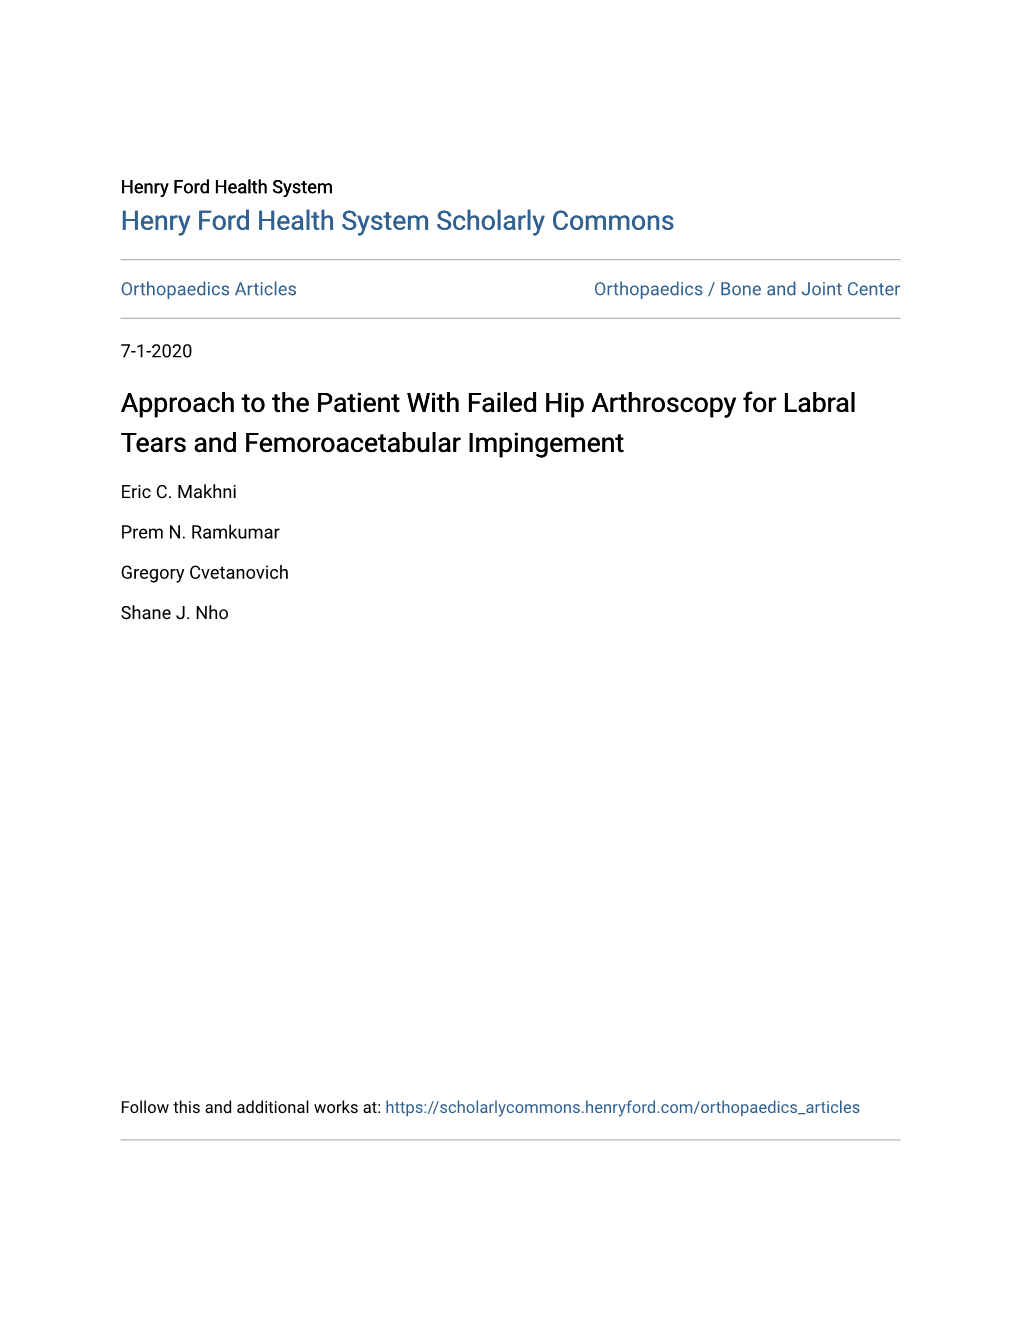 Approach to the Patient with Failed Hip Arthroscopy for Labral Tears and Femoroacetabular Impingement